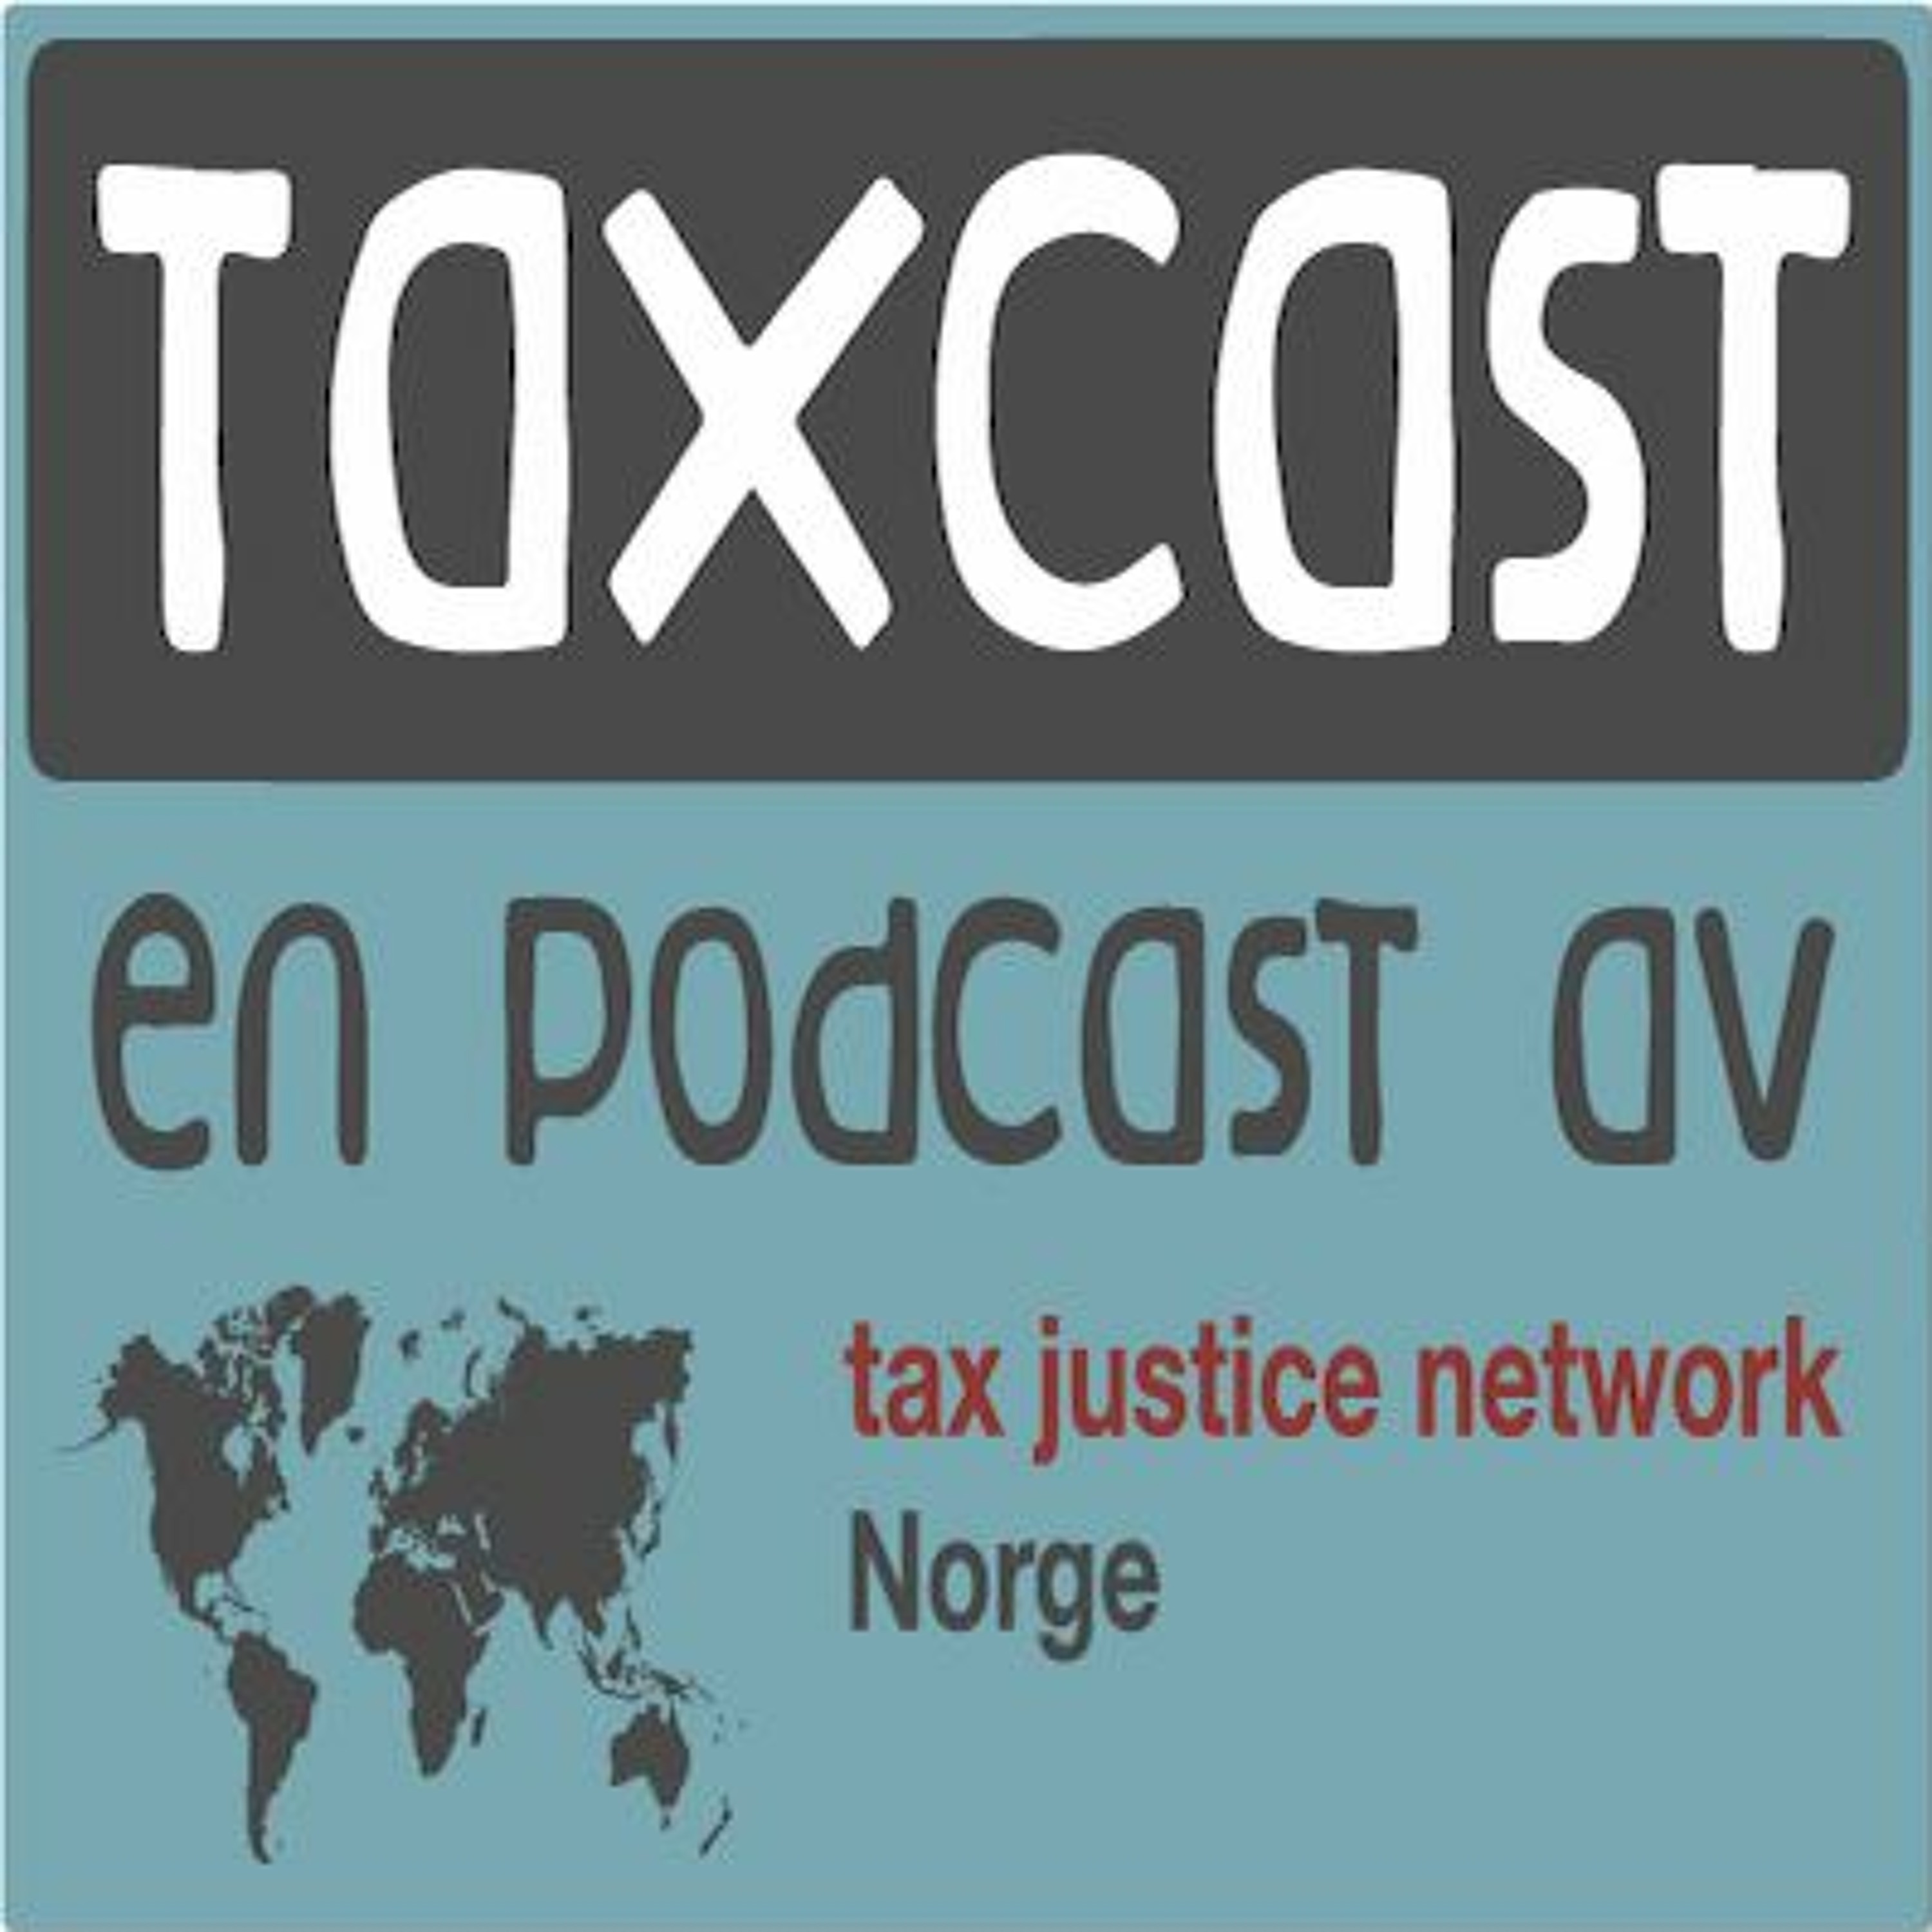 TaxCast: The Battle of The Brexiteers